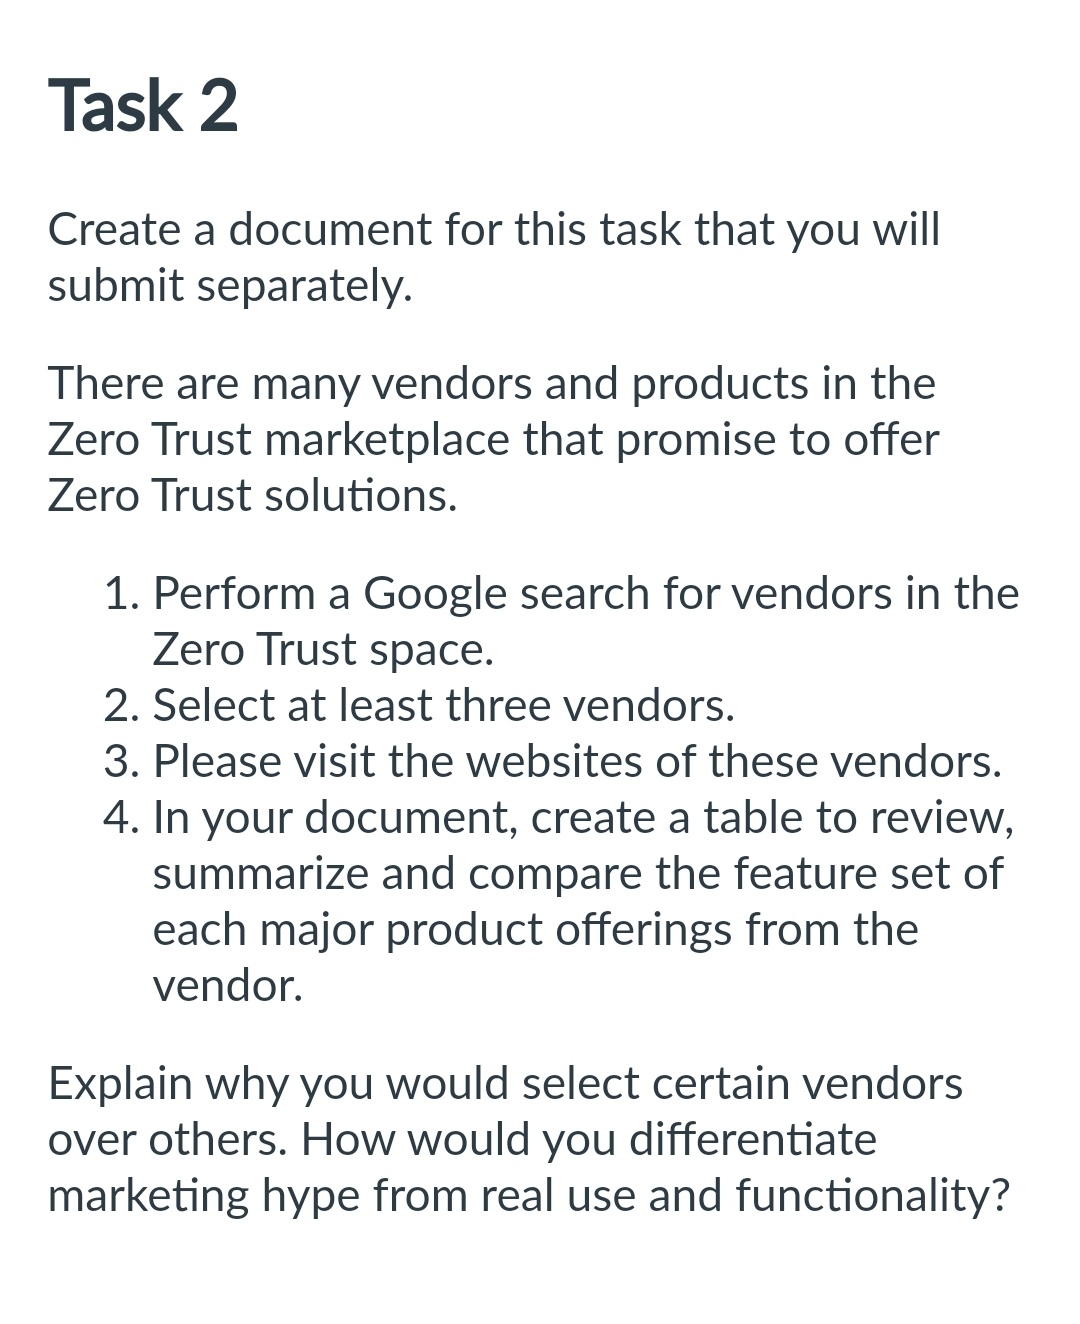 Task 2
Create a document for this task that you will
submit separately.
There are many vendors and products in the
Zero Trust marketplace that promise to offer
Zero Trust solutions.
1. Perform a Google search for vendors in the
Zero Trust space.
2. Select at least three vendors.
3. Please visit the websites of these vendors.
4. In your document, create a table to review,
summarize and compare the feature set of
each major product offerings from the
vendor.
Explain why you would select certain vendors
over others. How would you differentiate
marketing hype from real use and functionality?